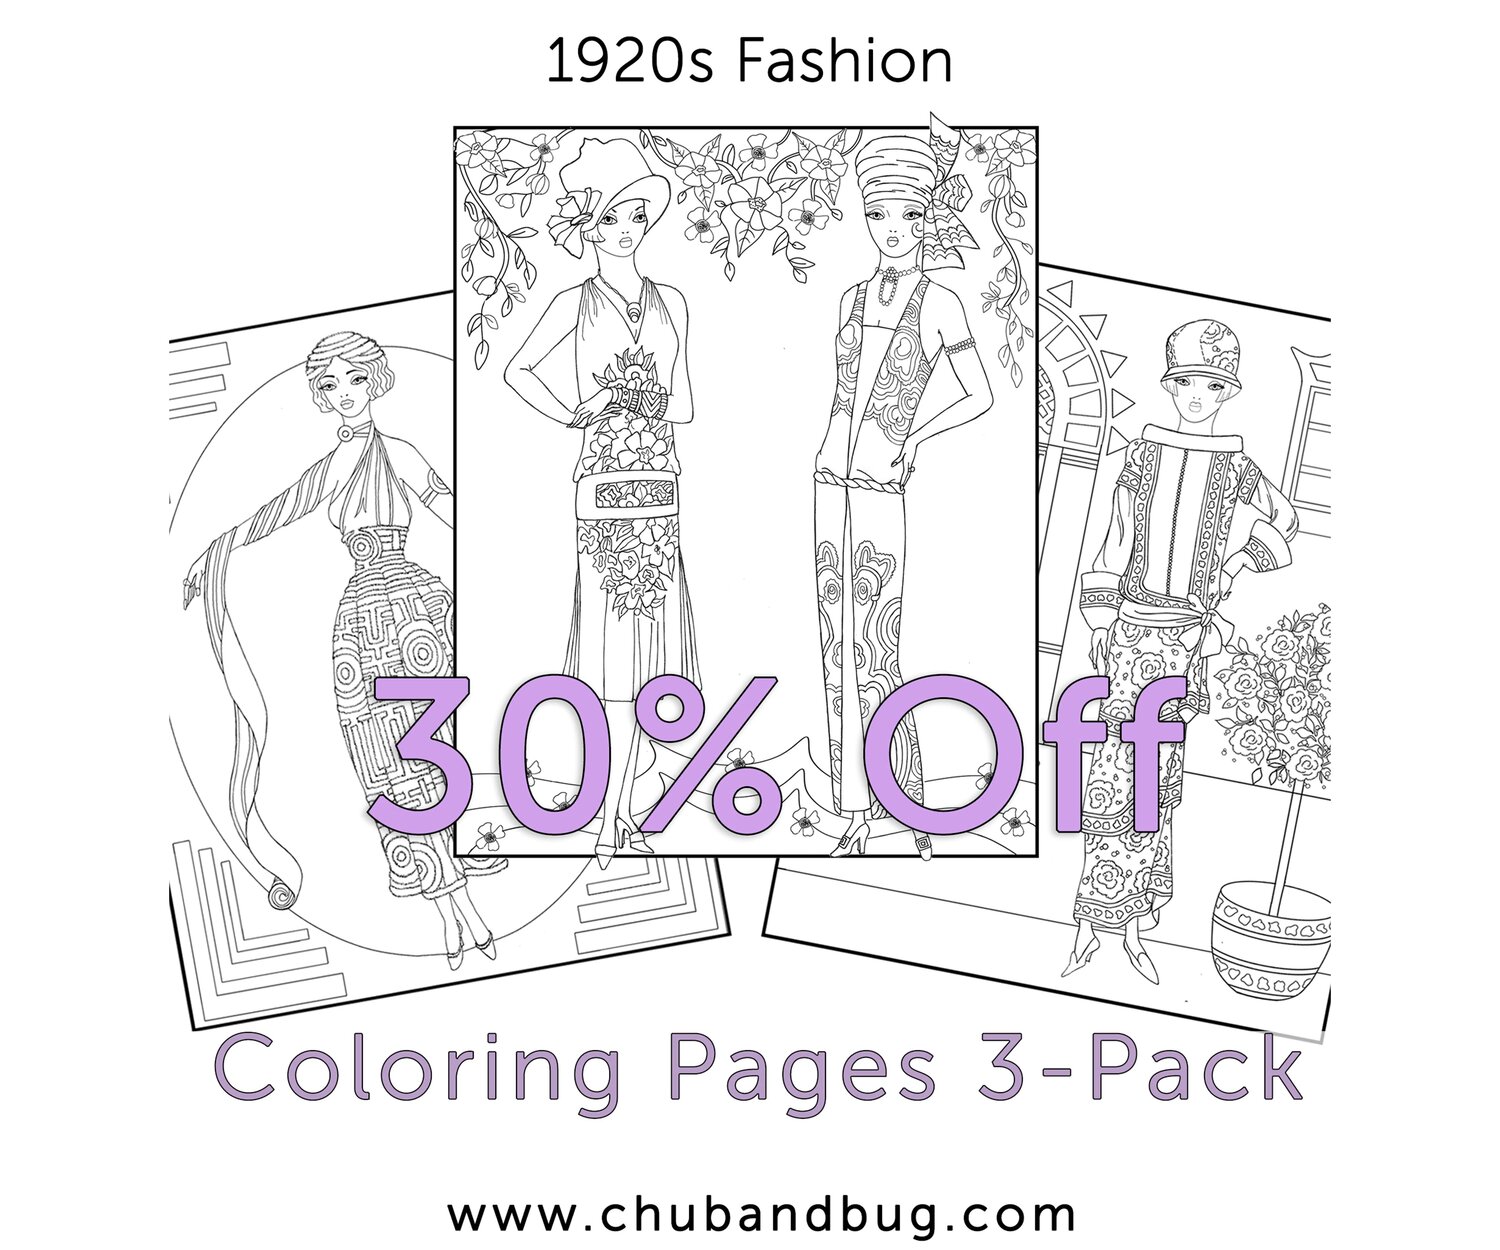 Adult Fashion Coloring Book - 1920s Paris Fashion — Chub and Bug  Illustration | Wall art and school supplies for kids and babies